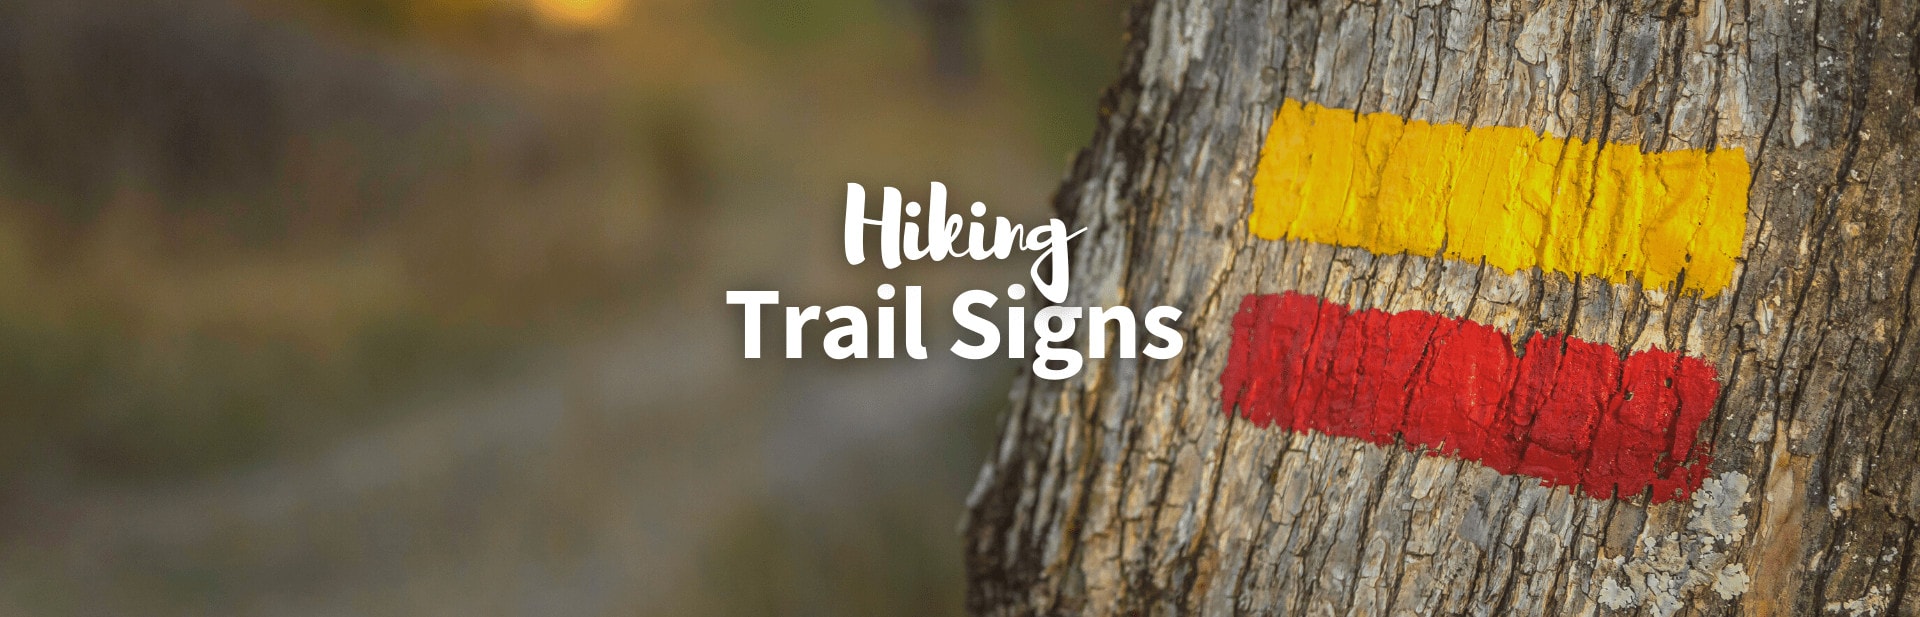 7 Must-Know Hiking Trail Signs